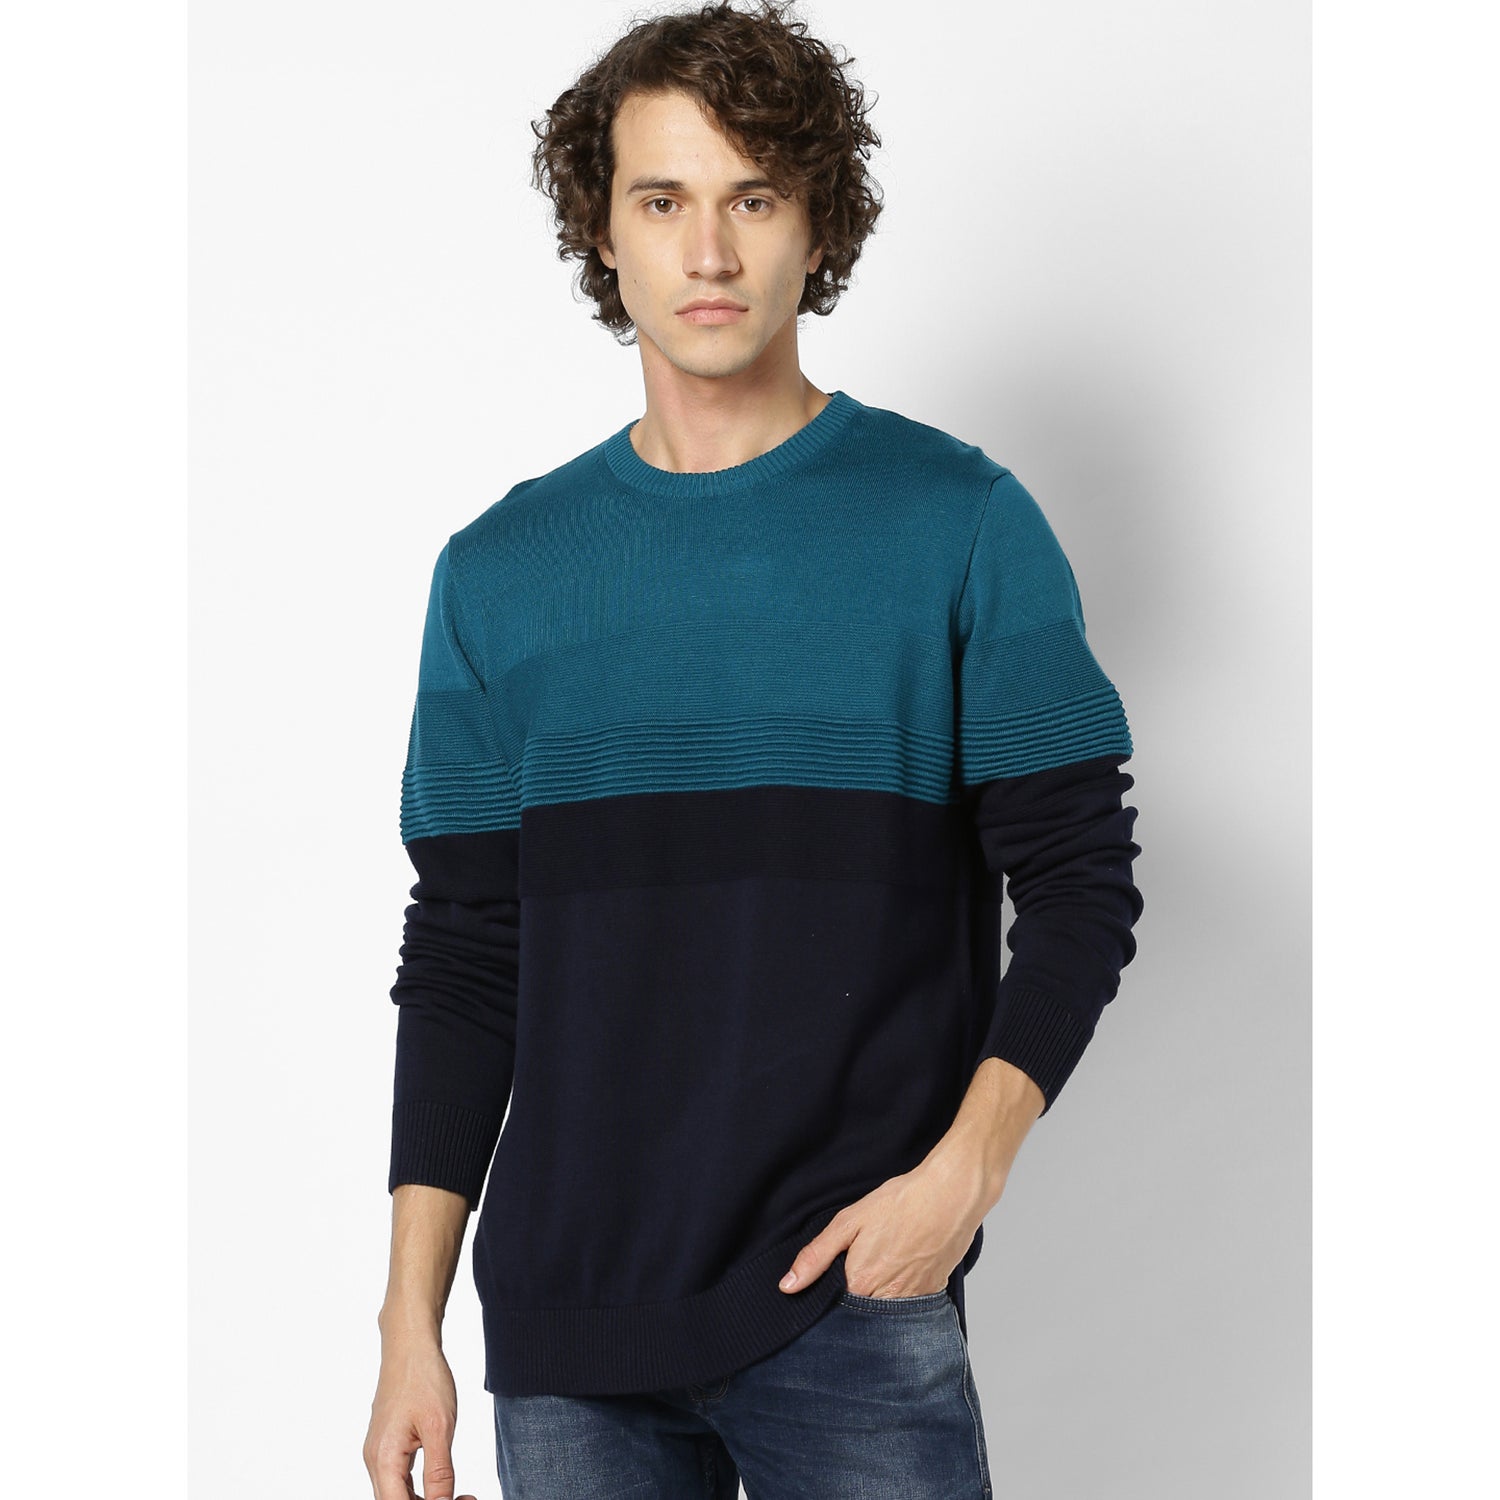 Teal Blue and Navy Blue Colourblocked Pullover Sweater (PESPORTY)